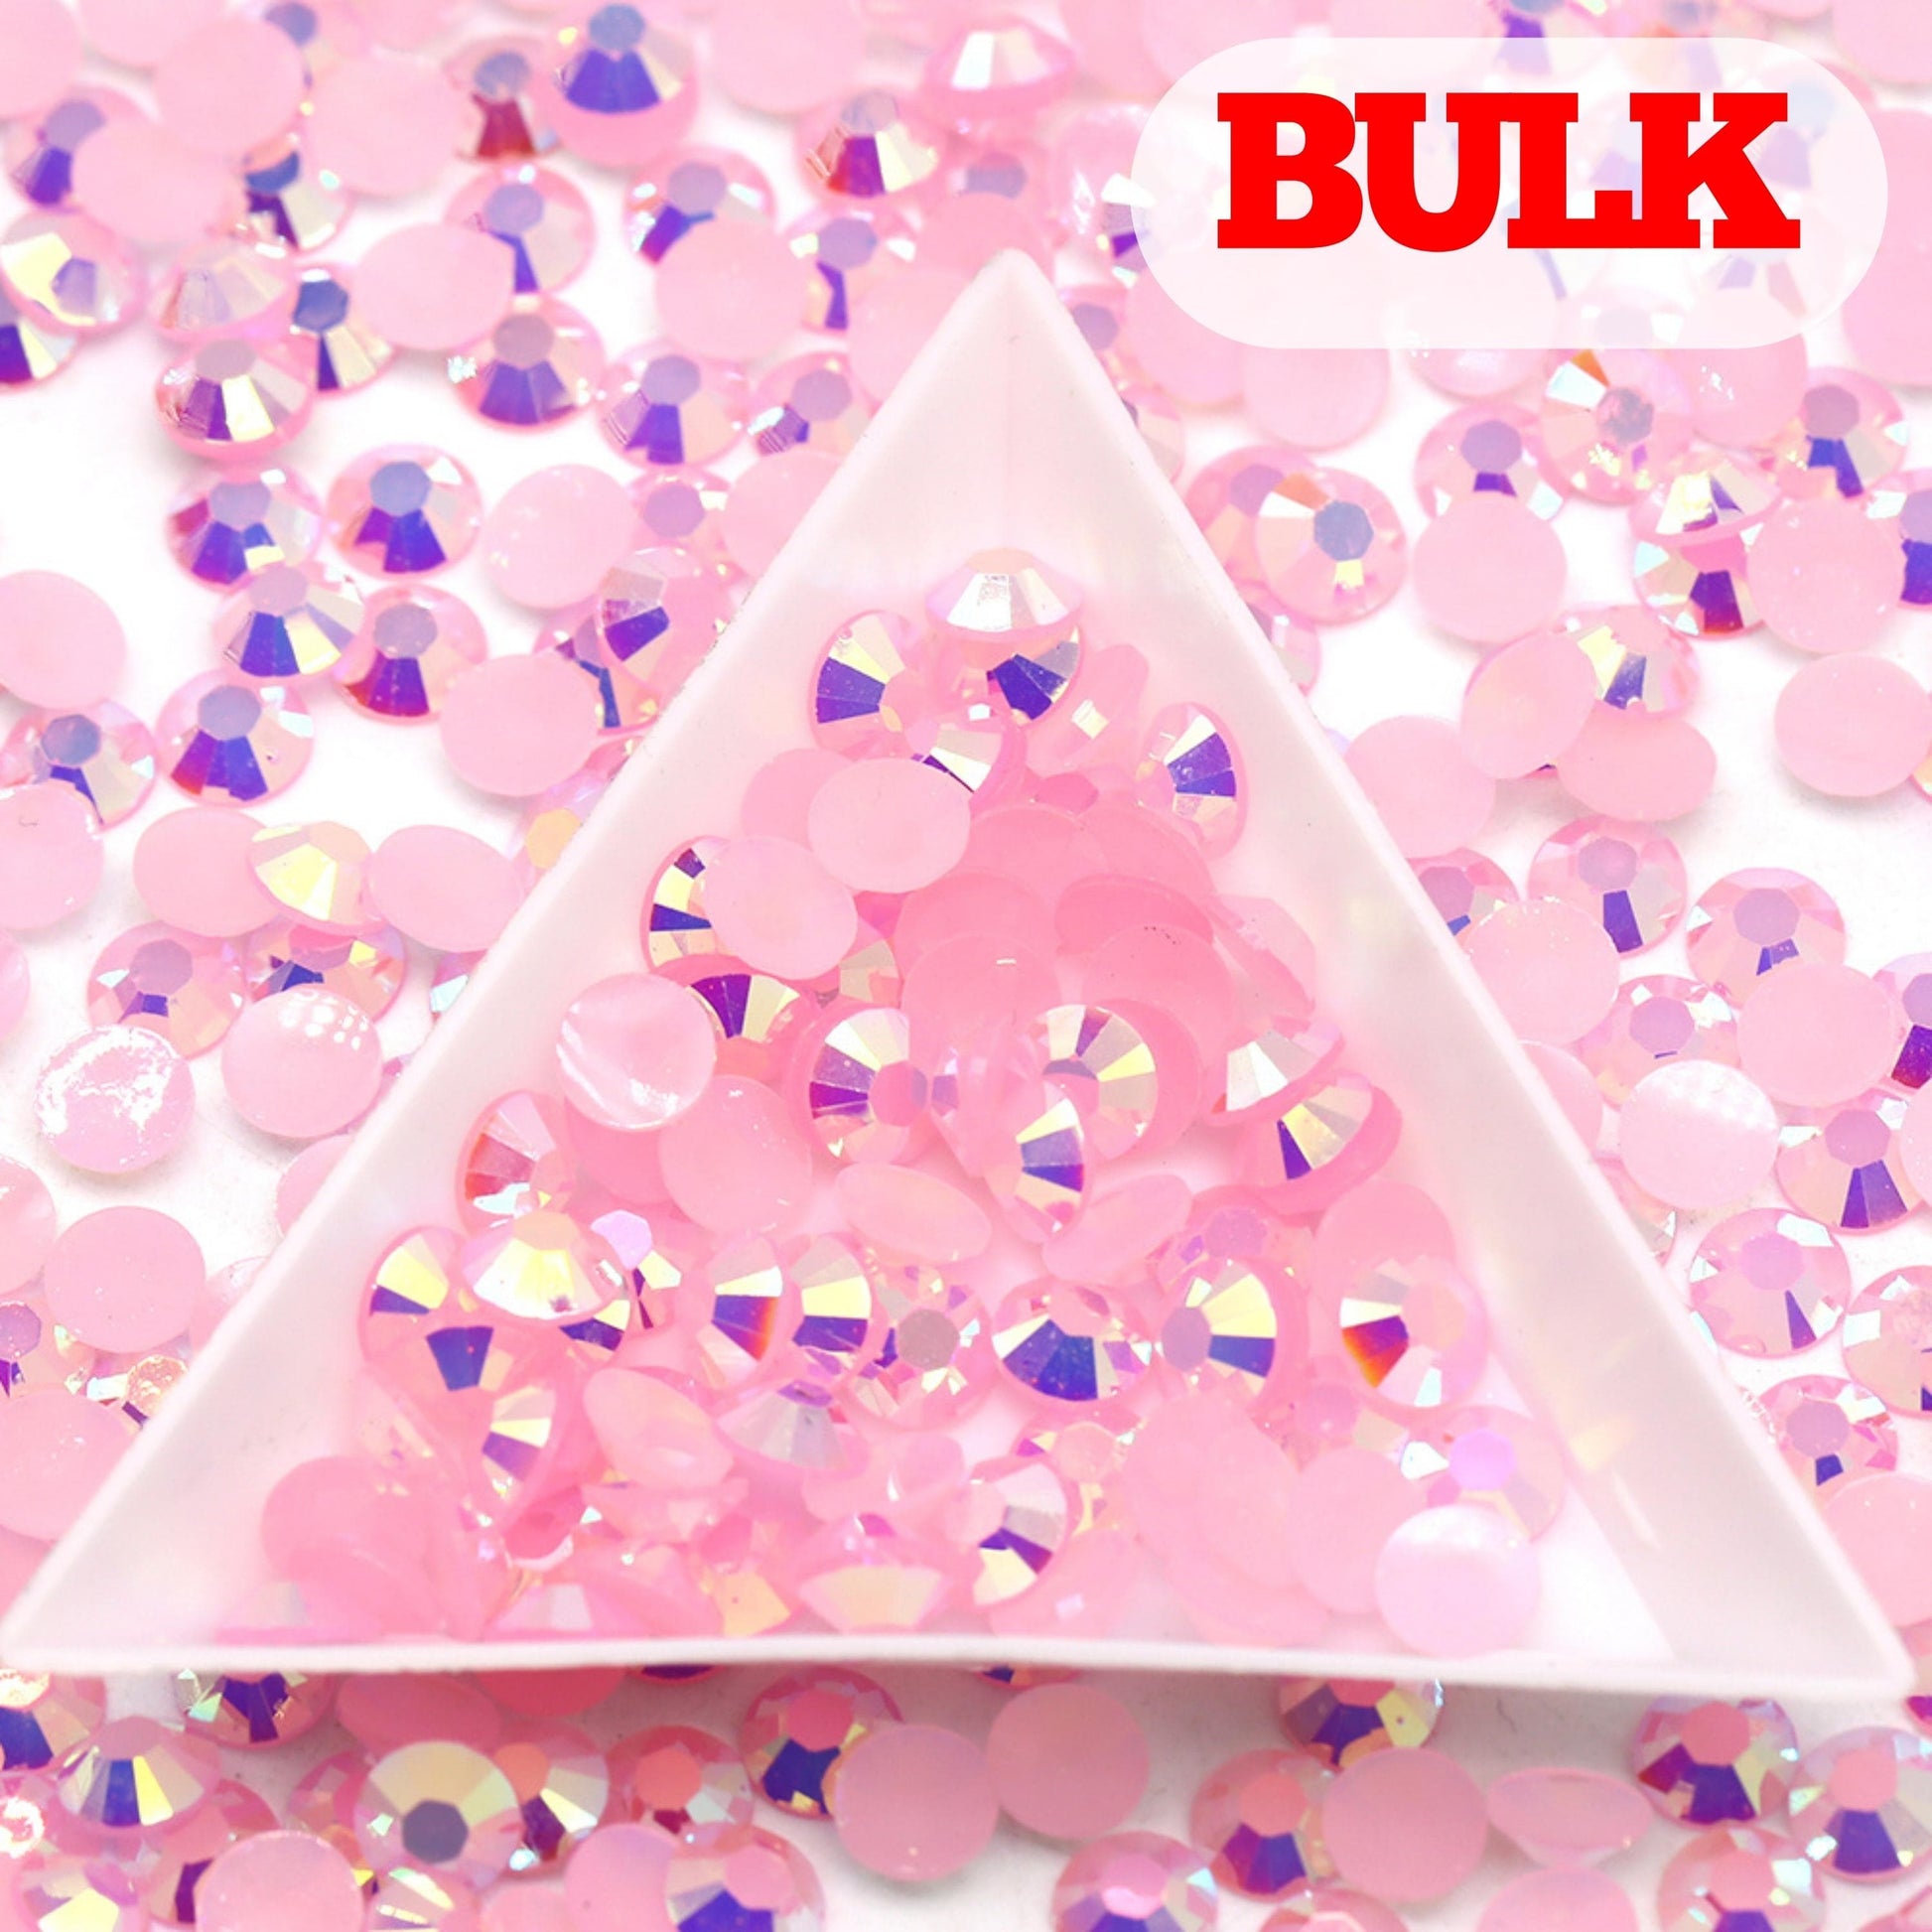  Yantuo Light Pink Jelly AB Stones Rhinestones 3mm,10000 Pcs  SS10 Rose Flatback Resin Rhinestone, Wholesale Jelly Resin Stone for DIY  Craft, Tumblers , Cup, Shoes, Crafts, Makeup